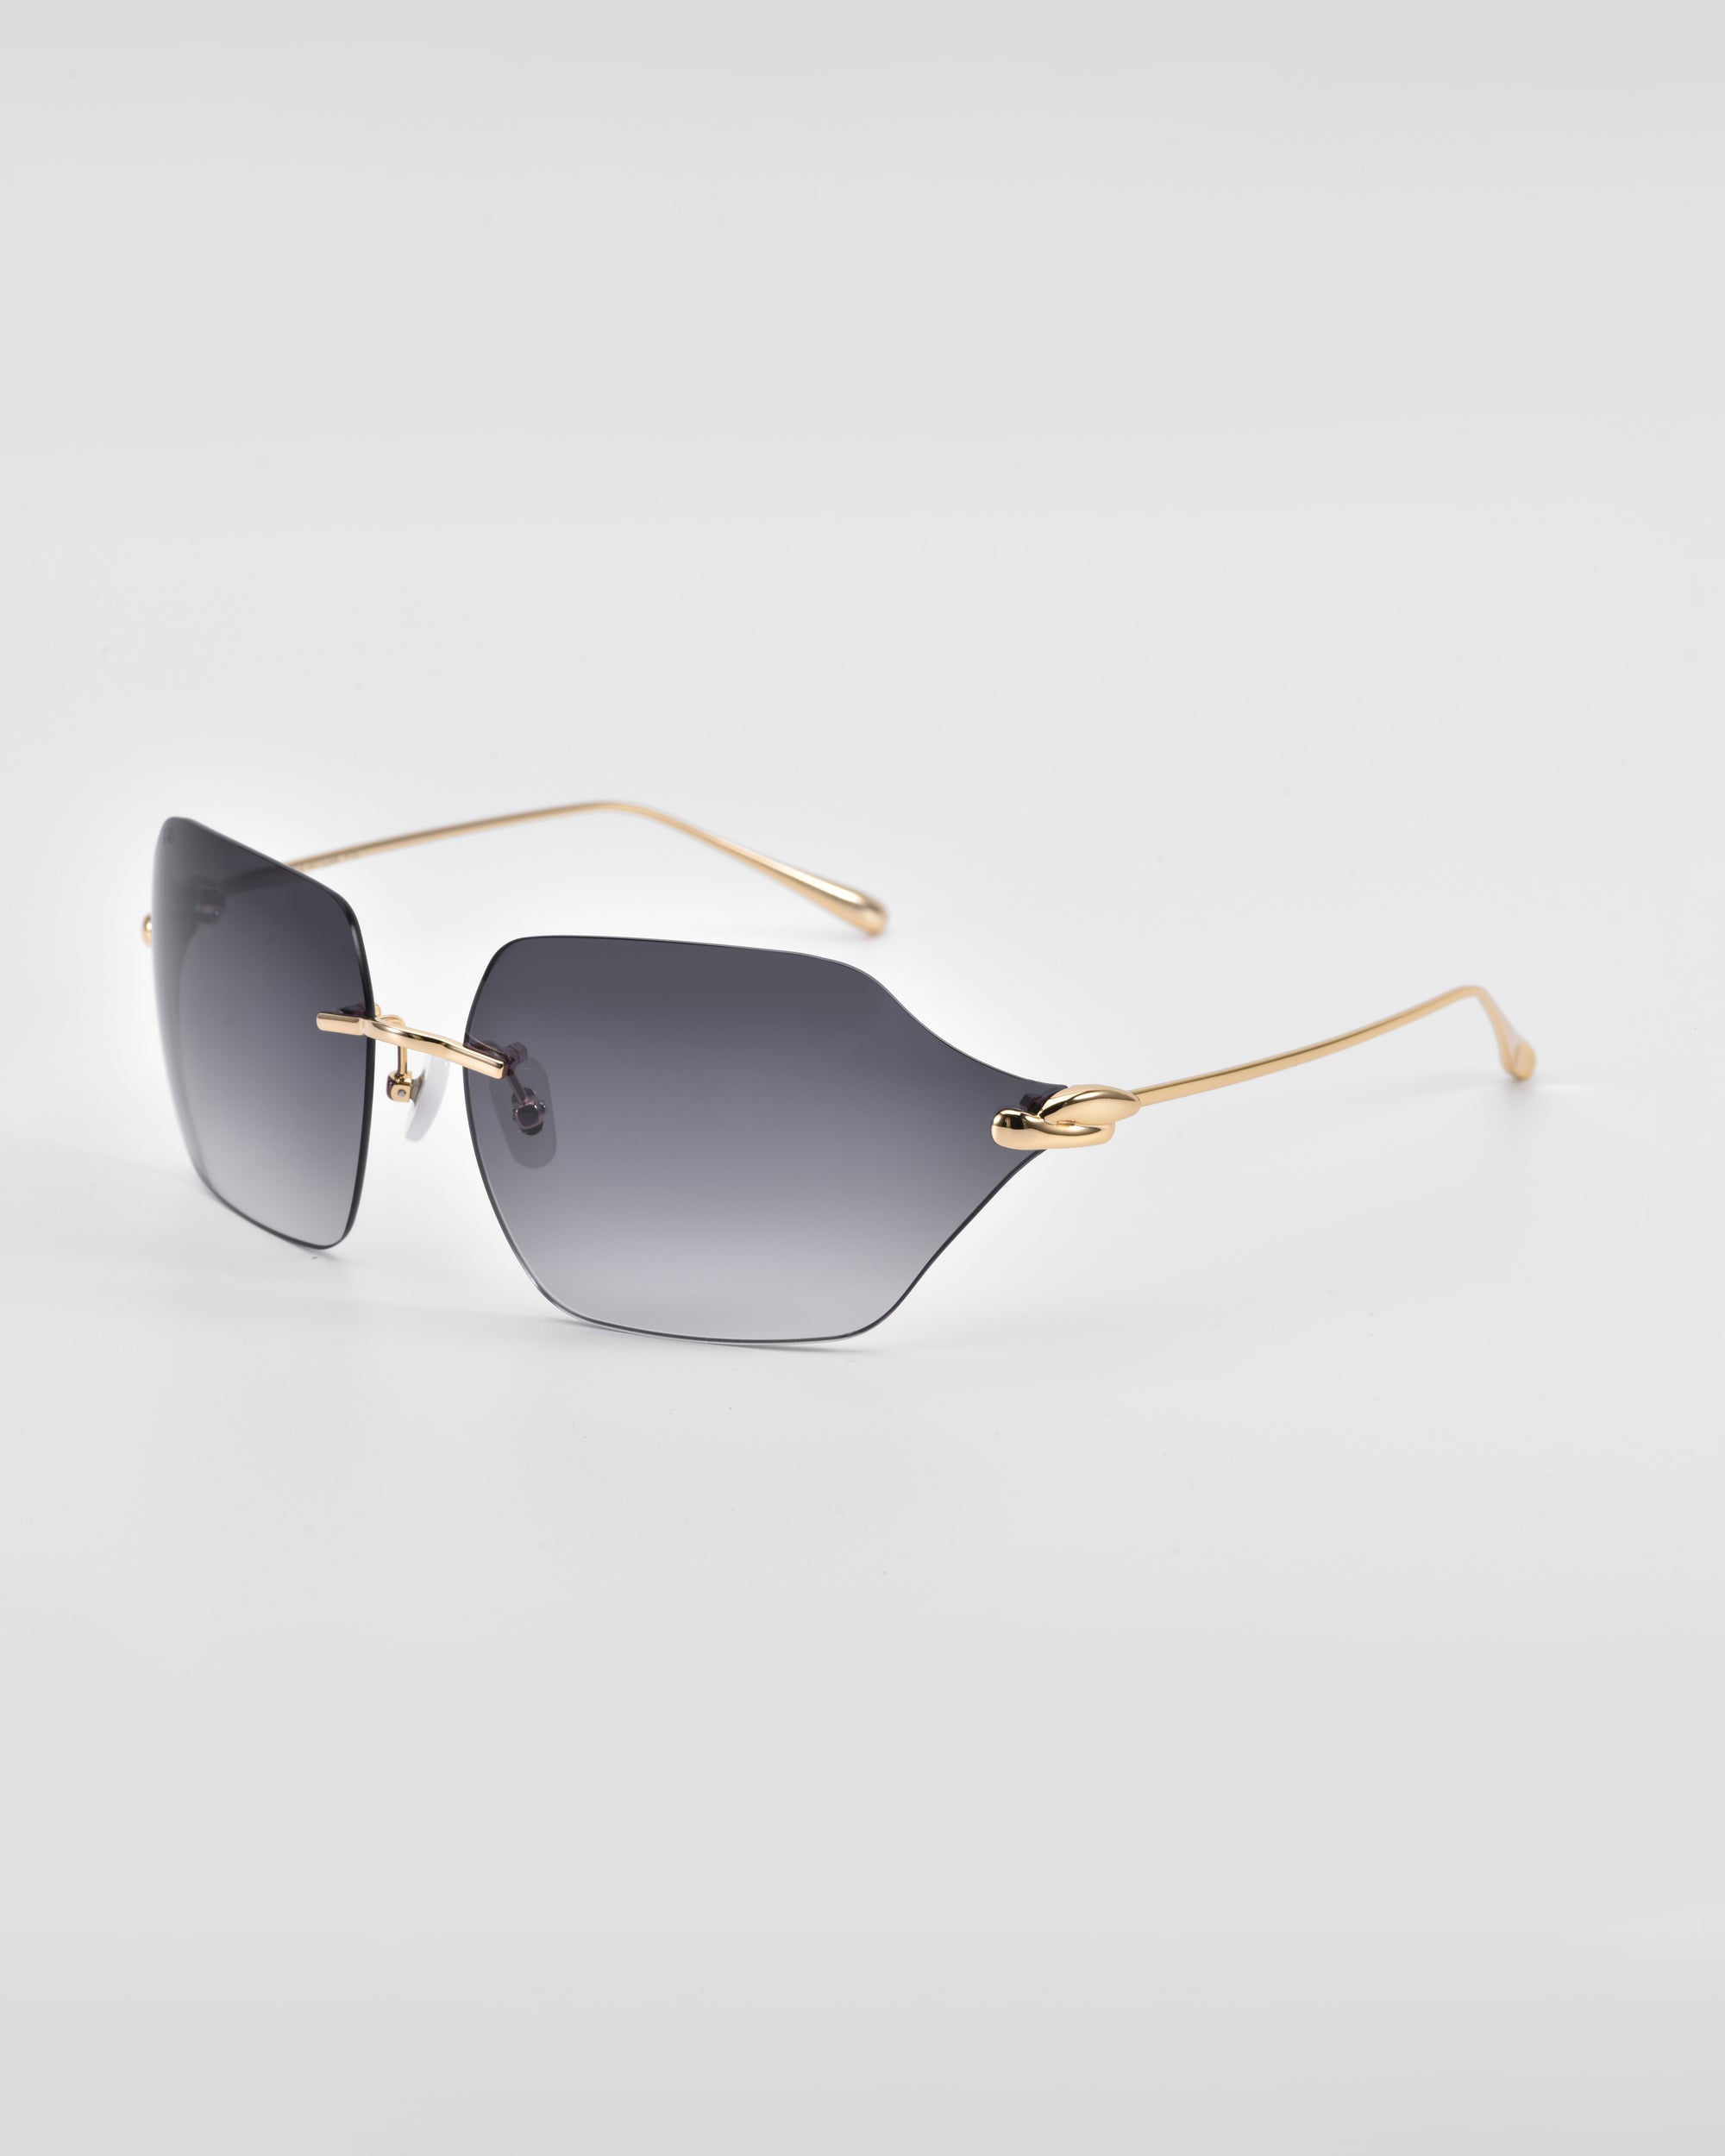 A pair of sleek, modern For Art&#39;s Sake® Serpent II sunglasses with grey gradient lens and thin gold temples shown on a plain white background. The design features rimless lenses with a slight cat-eye shape, 18-karat gold plating, and minimalistic yet stylish metal accents.